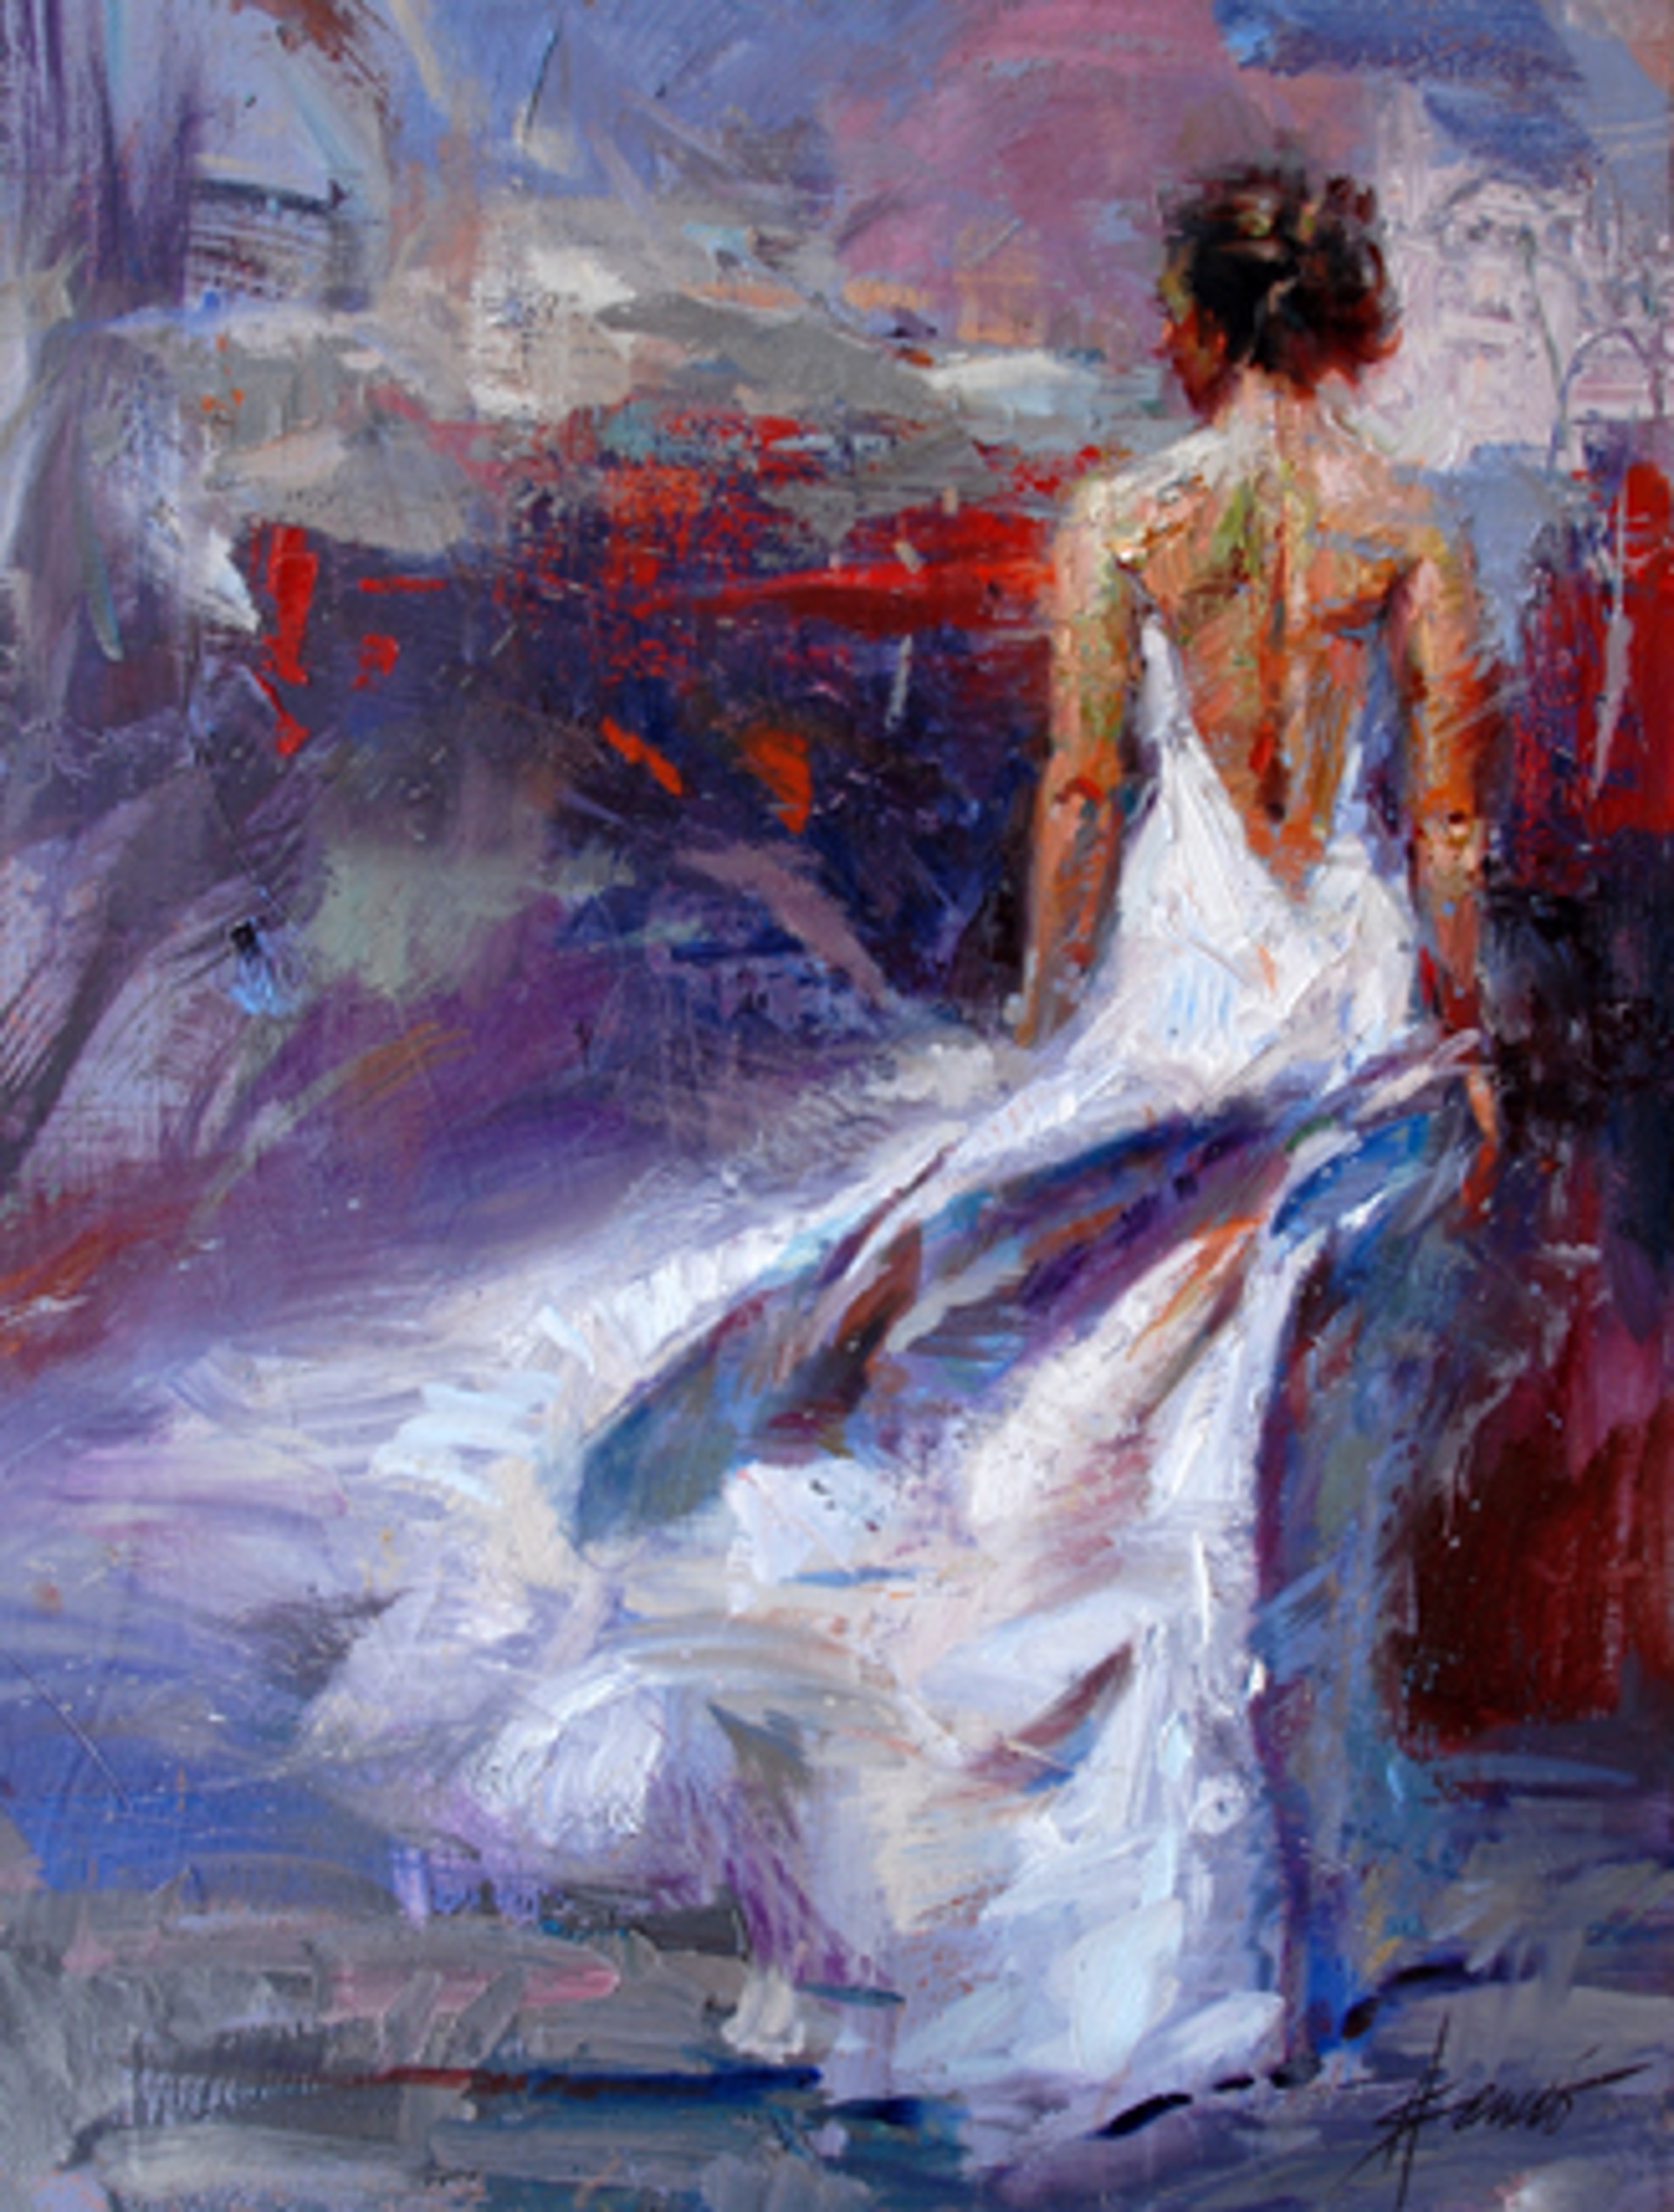 Winds of Change by Henry Asencio